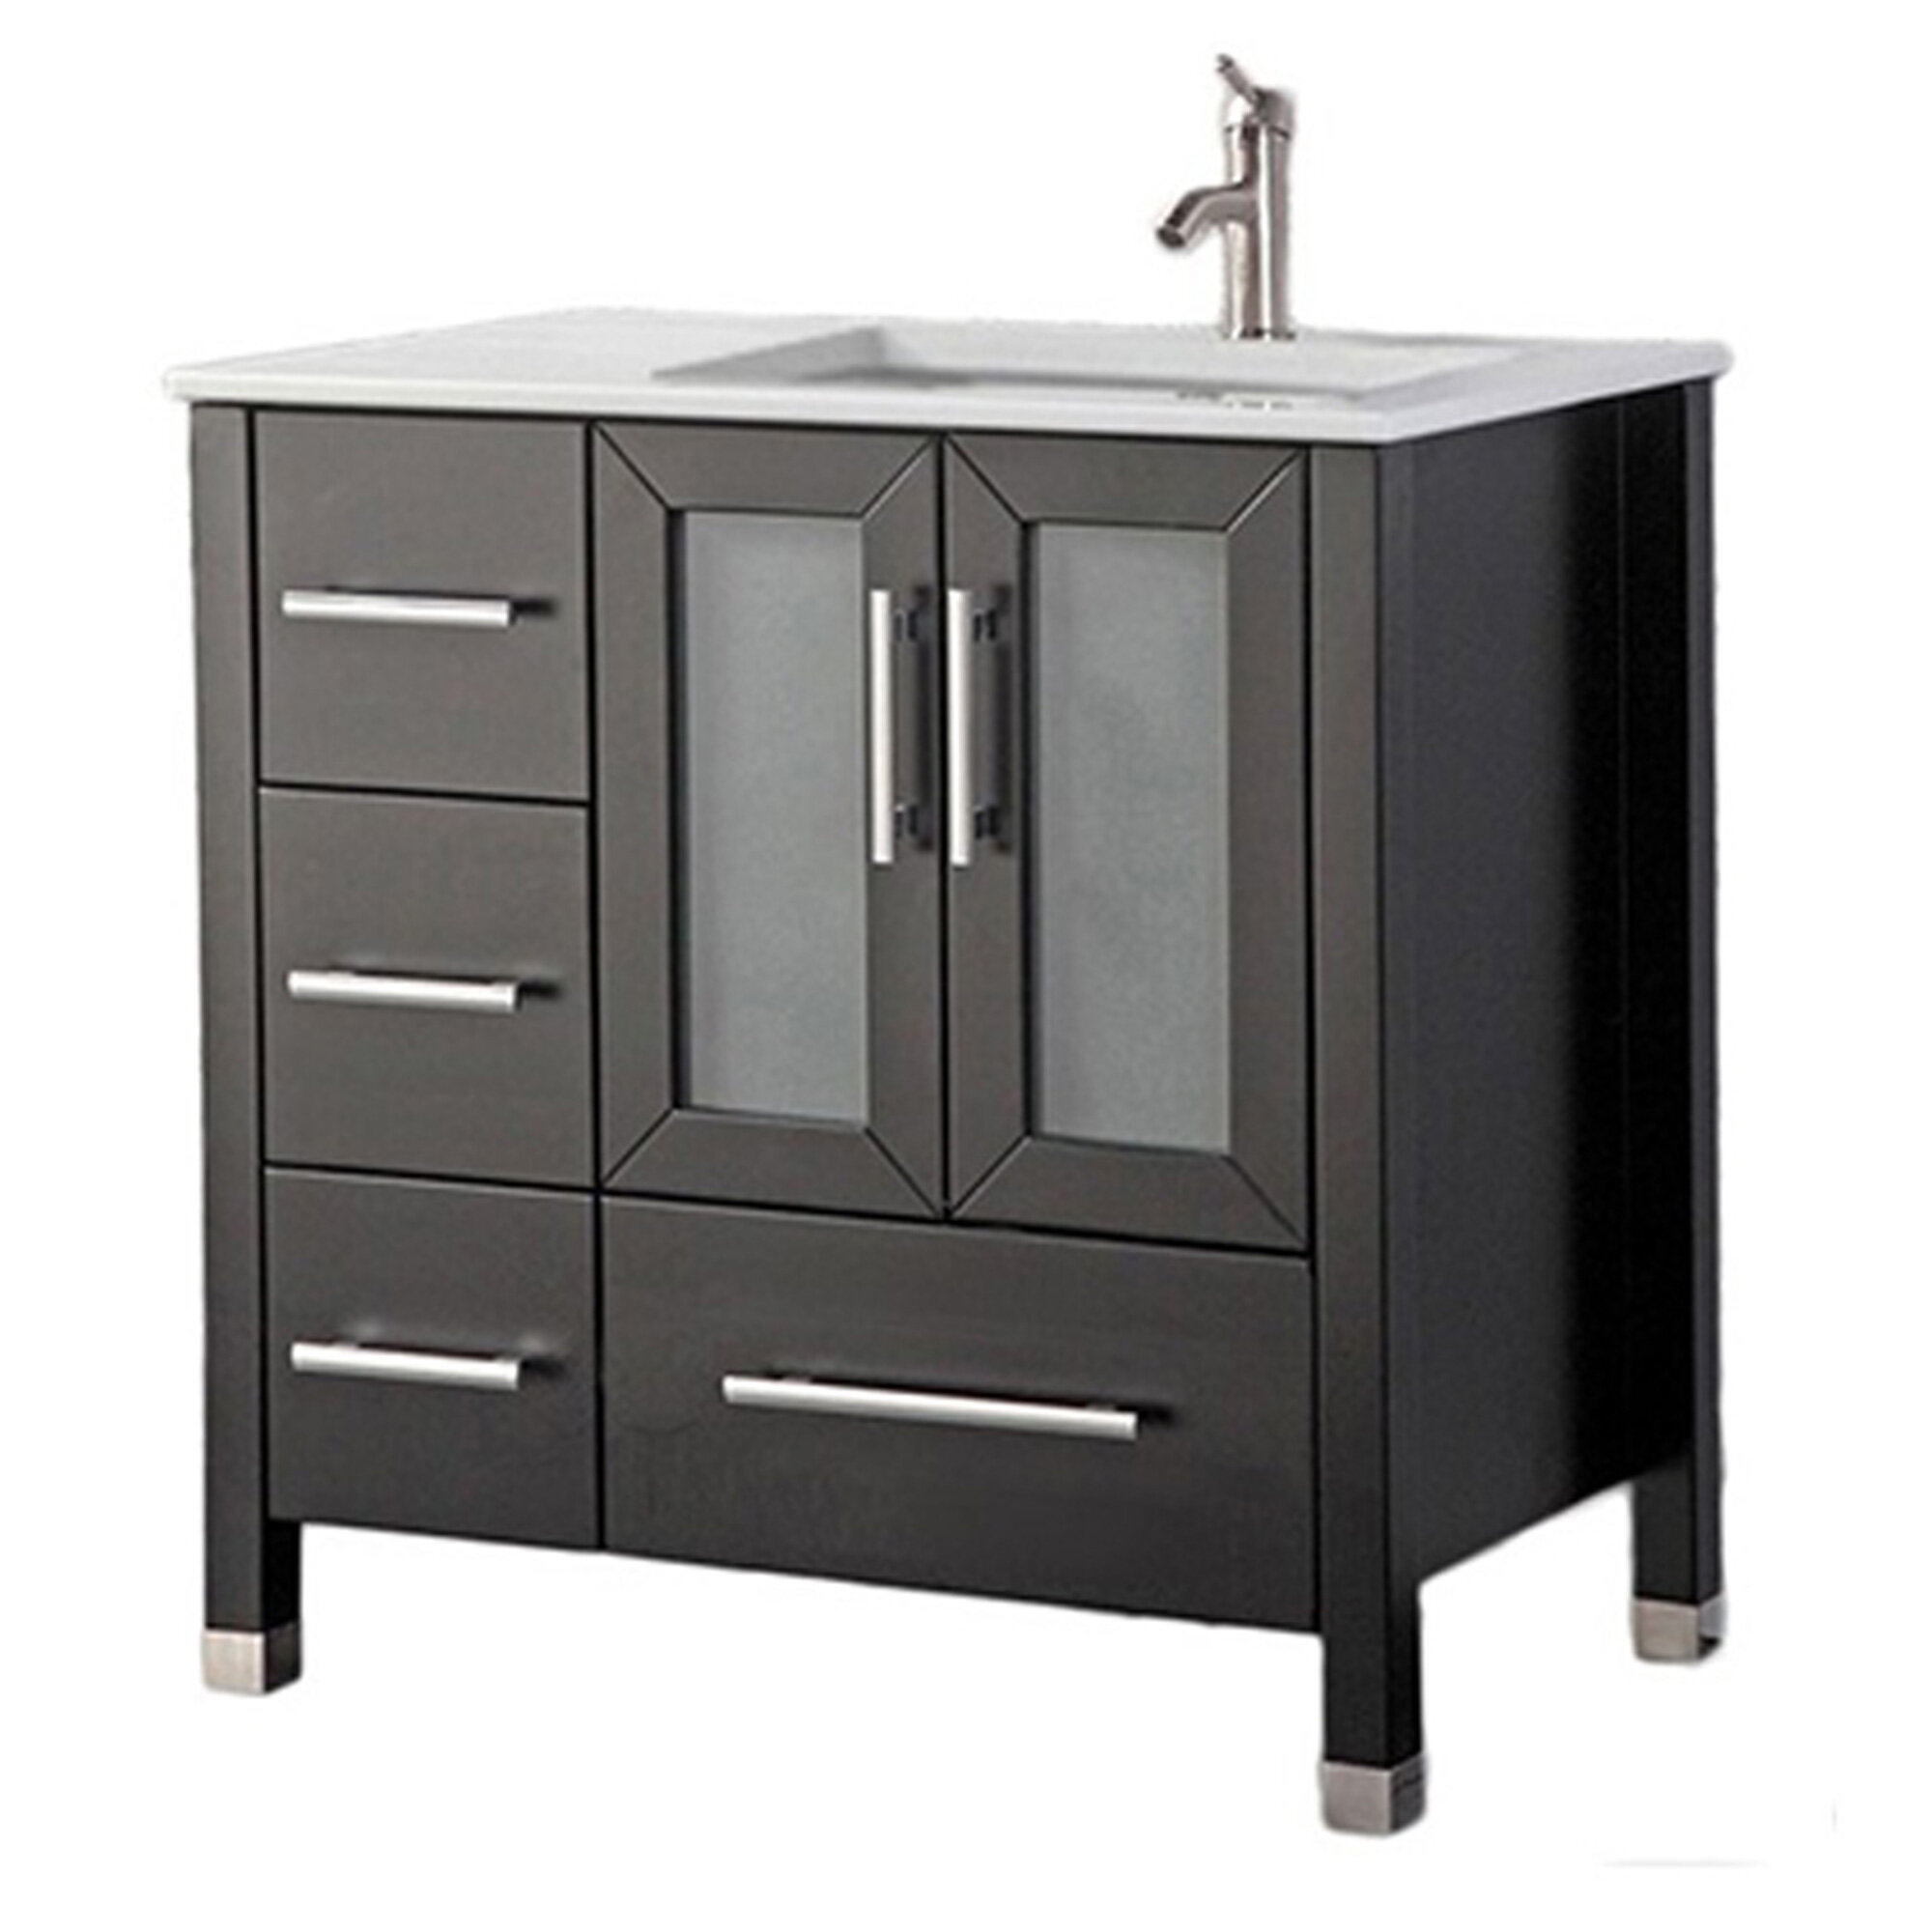 Right Offset Bathroom Vanity You Ll, 48 Vanity Top With Sink On Right Side